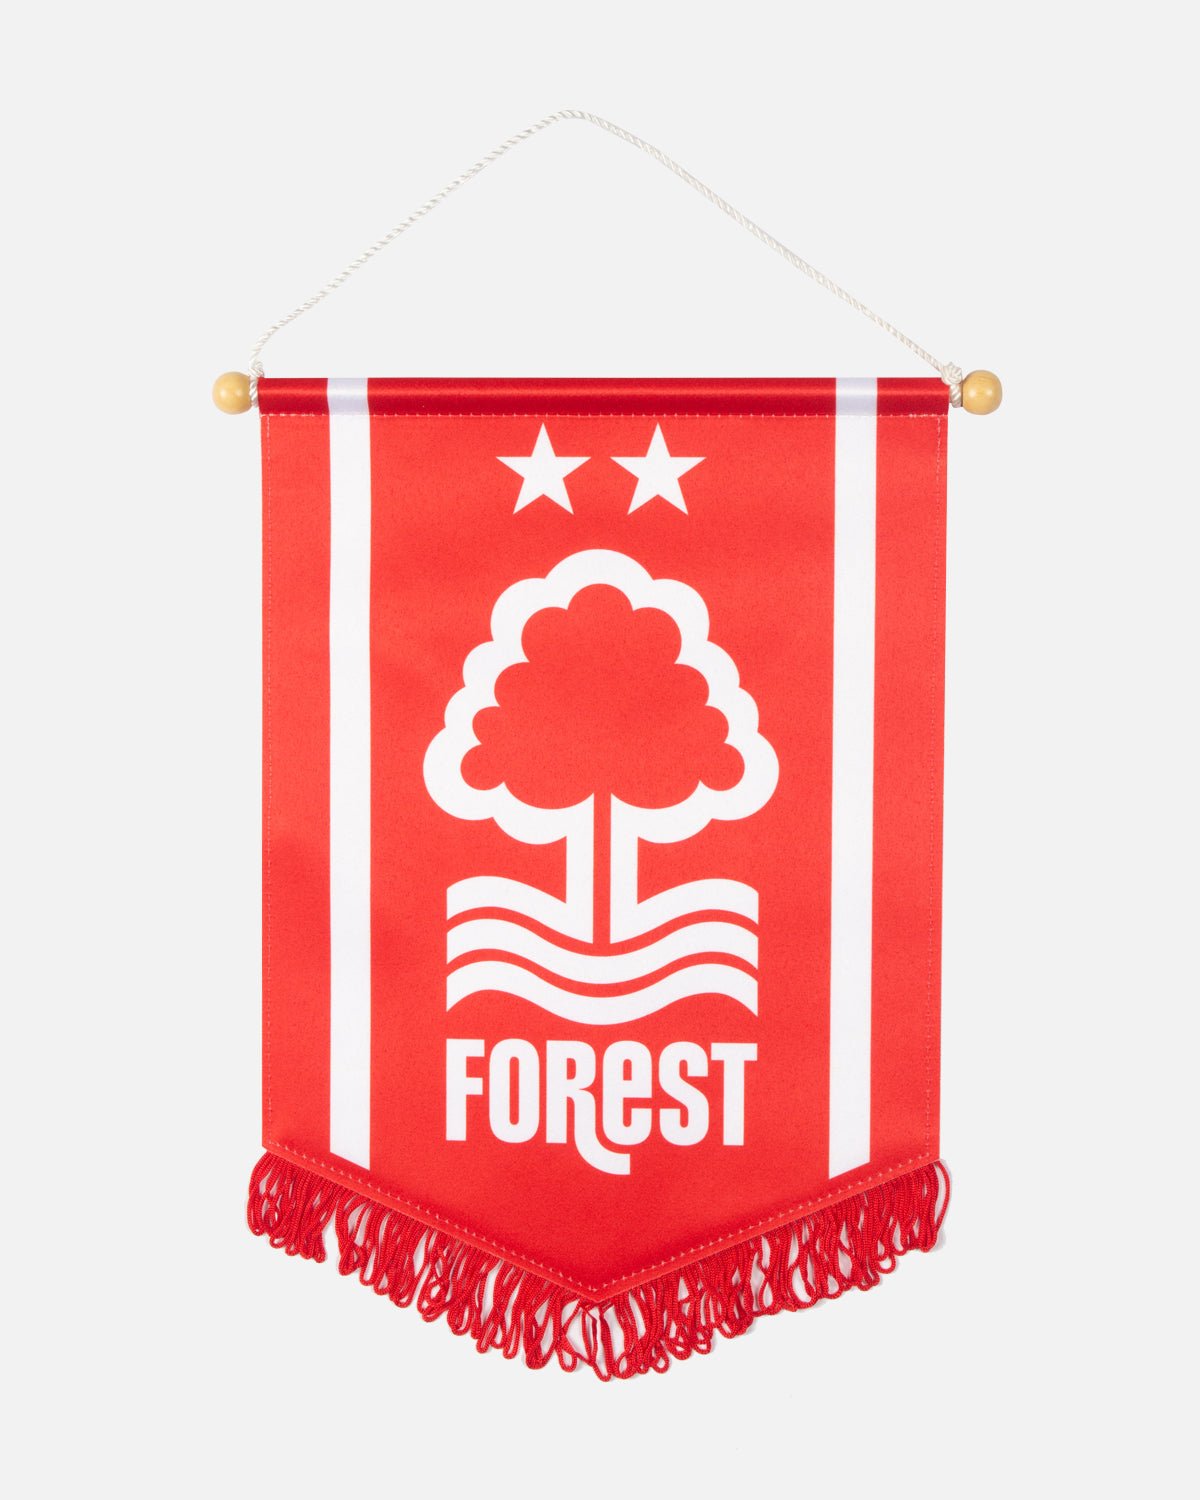 NFFC Crest Pennant - Nottingham Forest FC